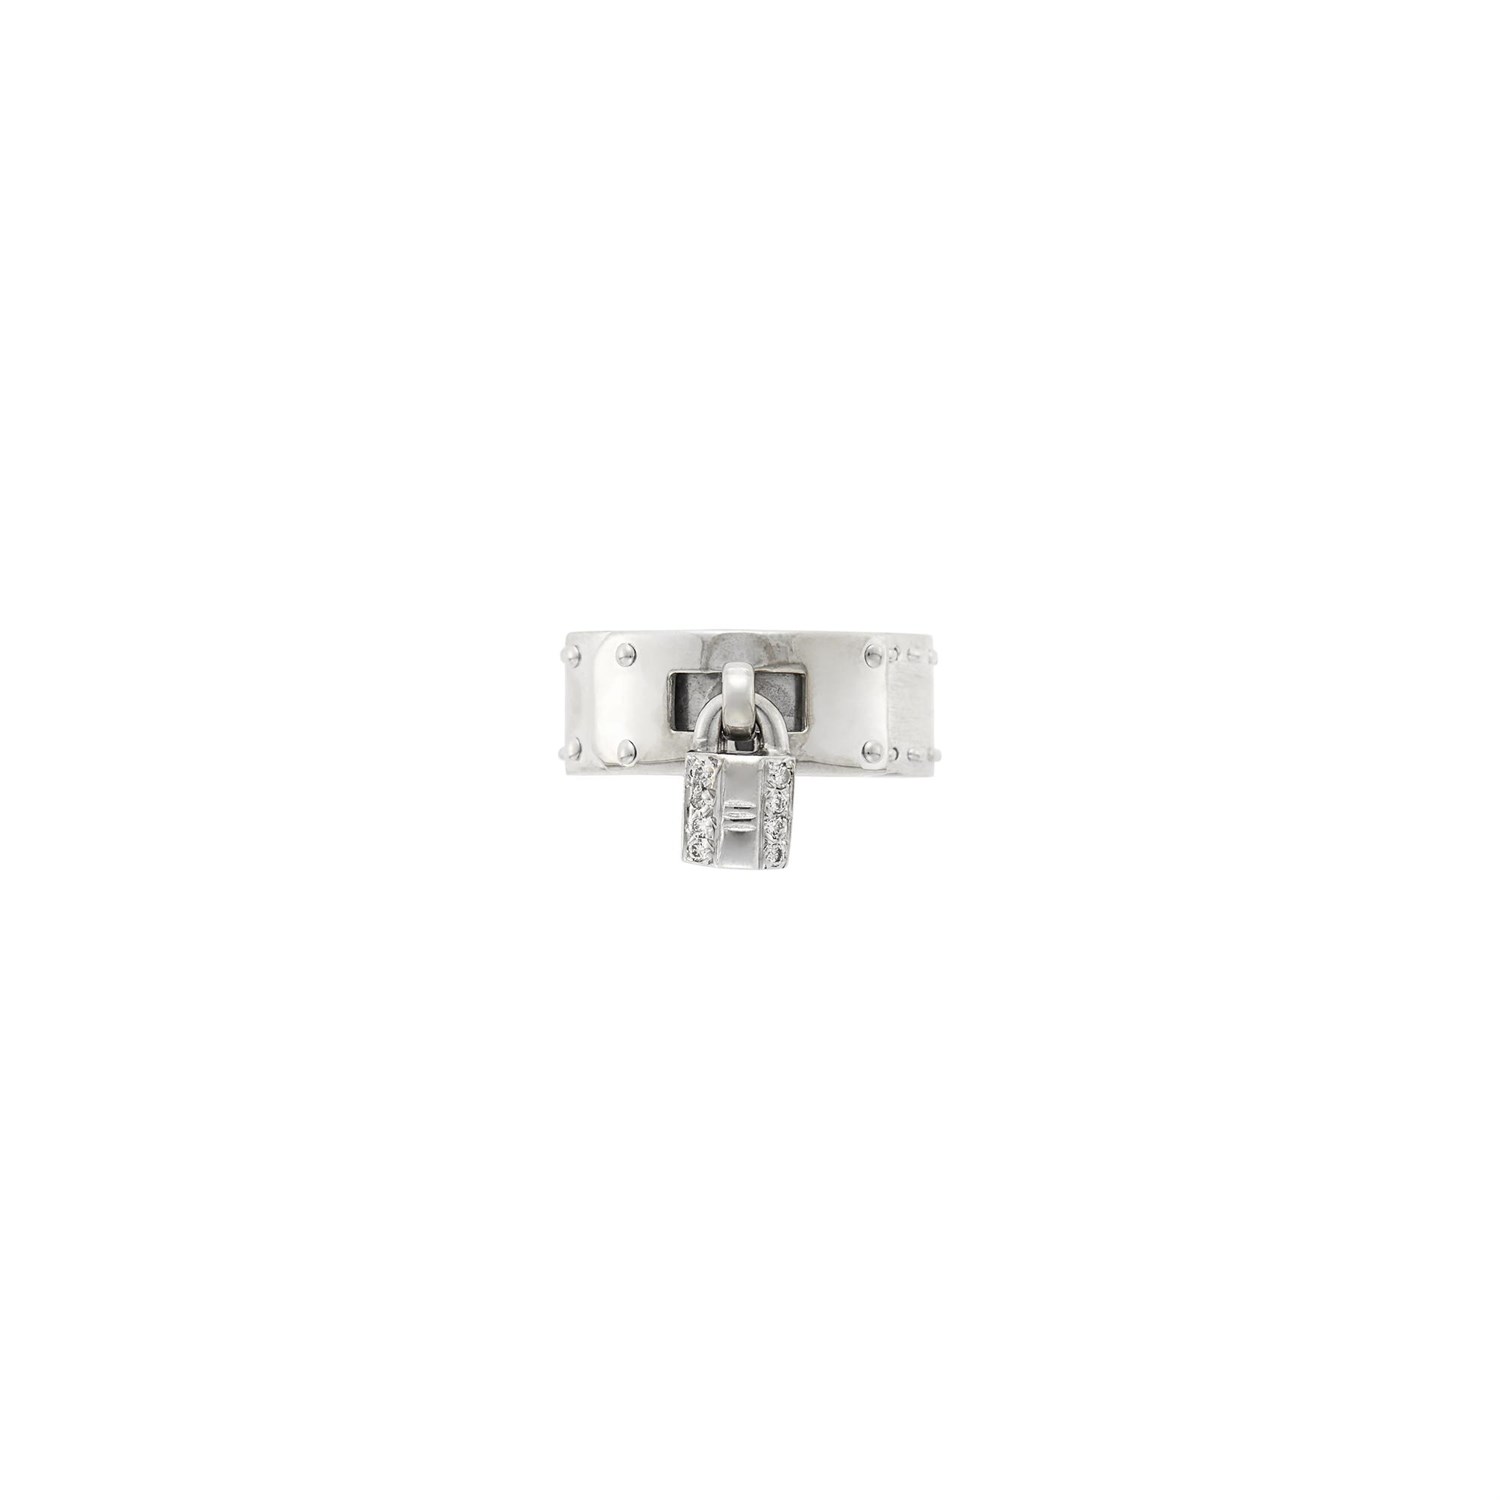 Lot 49 - Hermès White Gold and Diamond 'Kelly' Band Ring, France